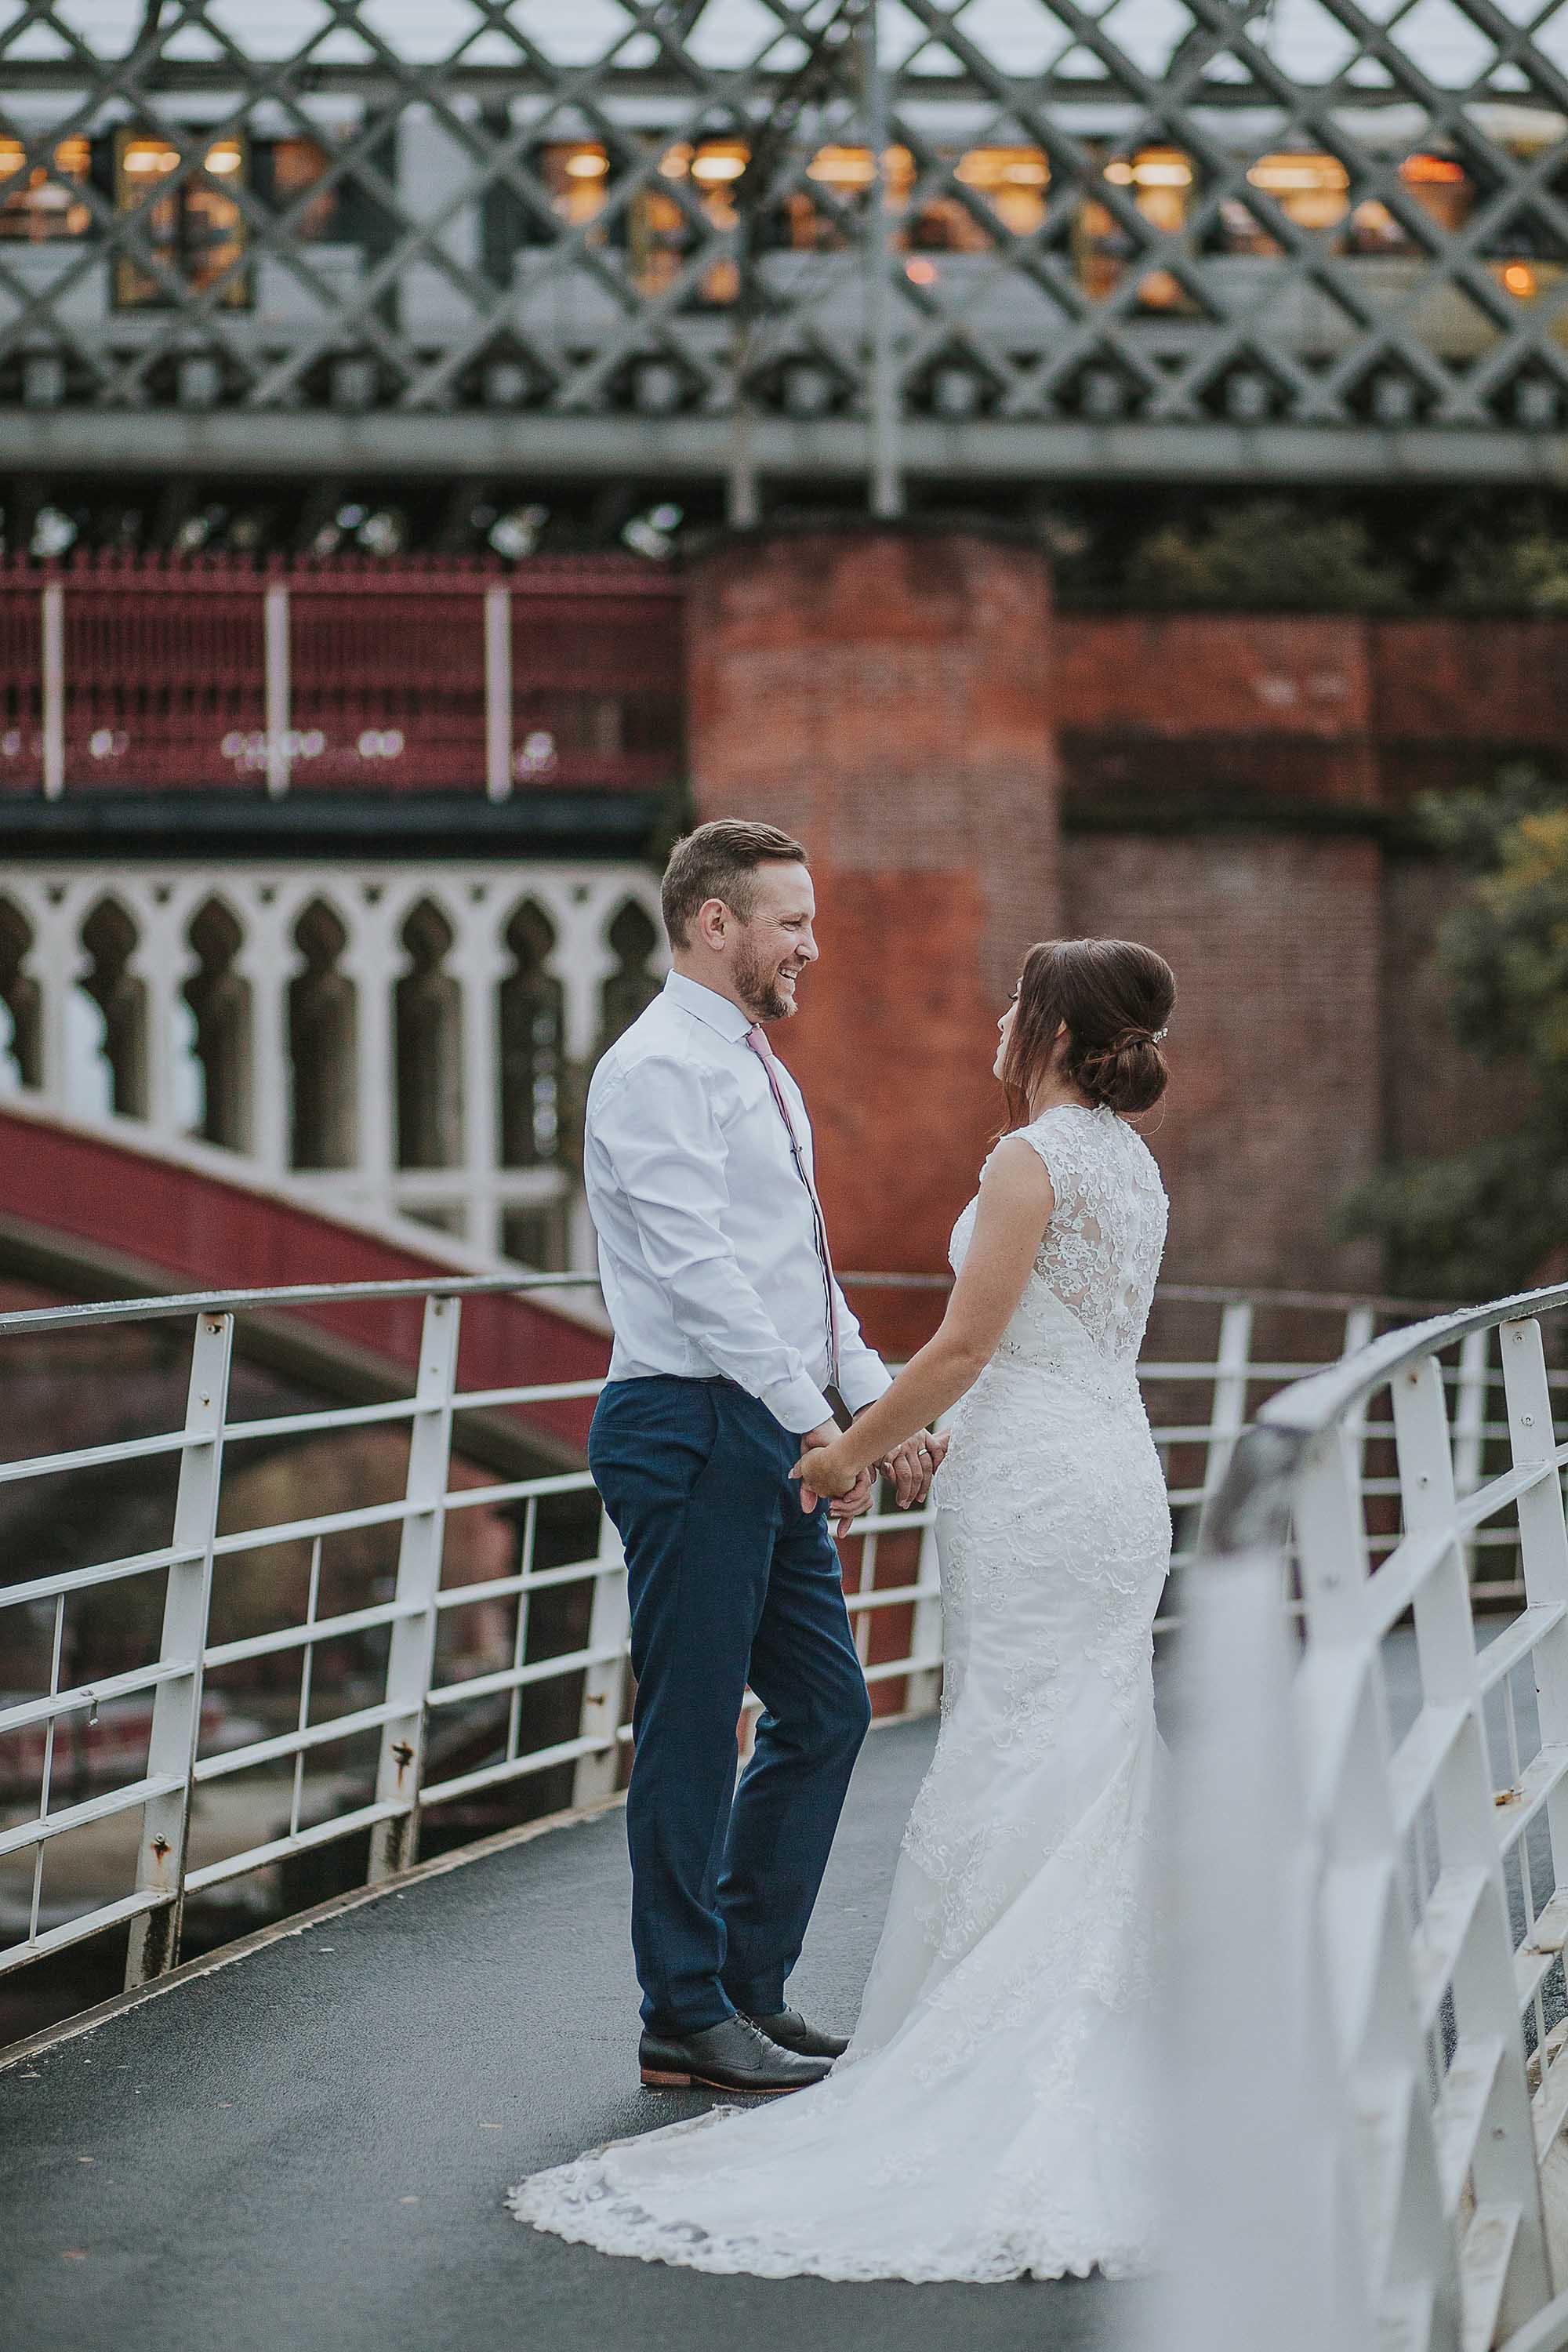 Manchester wedding at The Castlefield Rooms